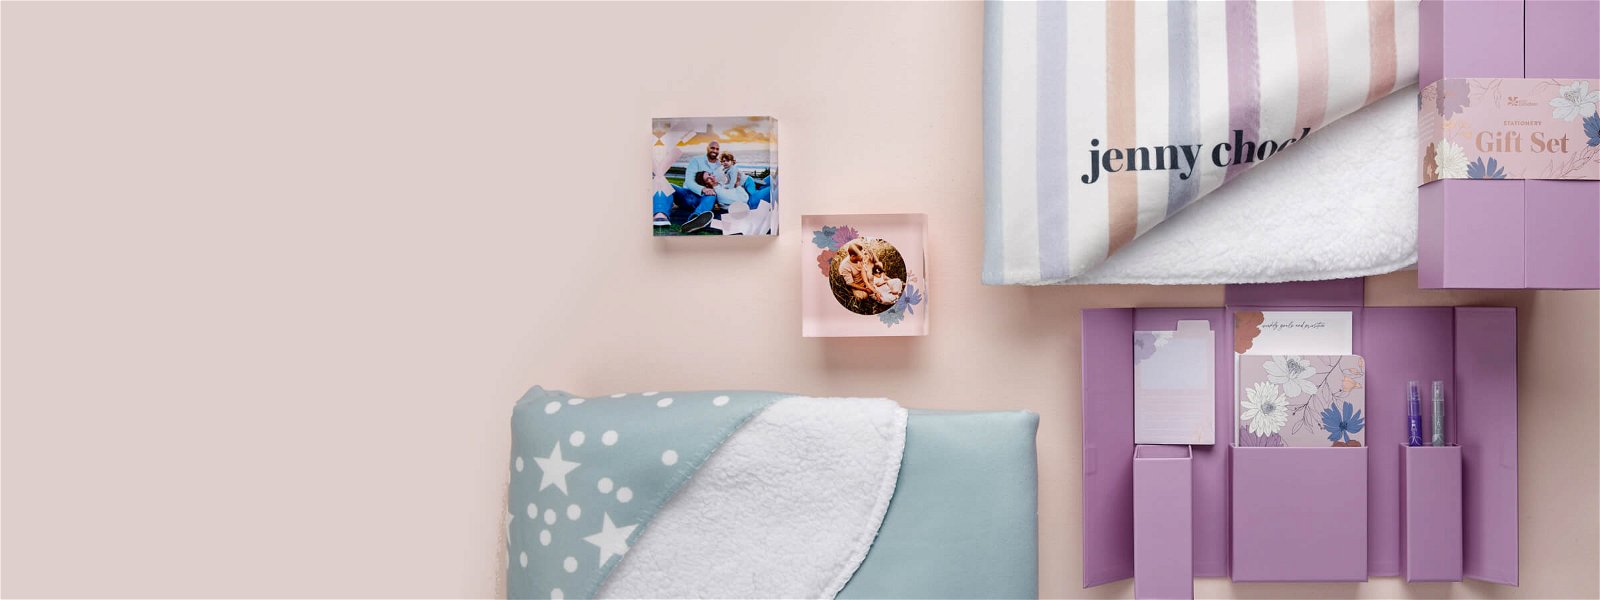 An overhead desk scene of personalized sherpa throws, acrylic blocks featuring family photos and stationery gift sets.